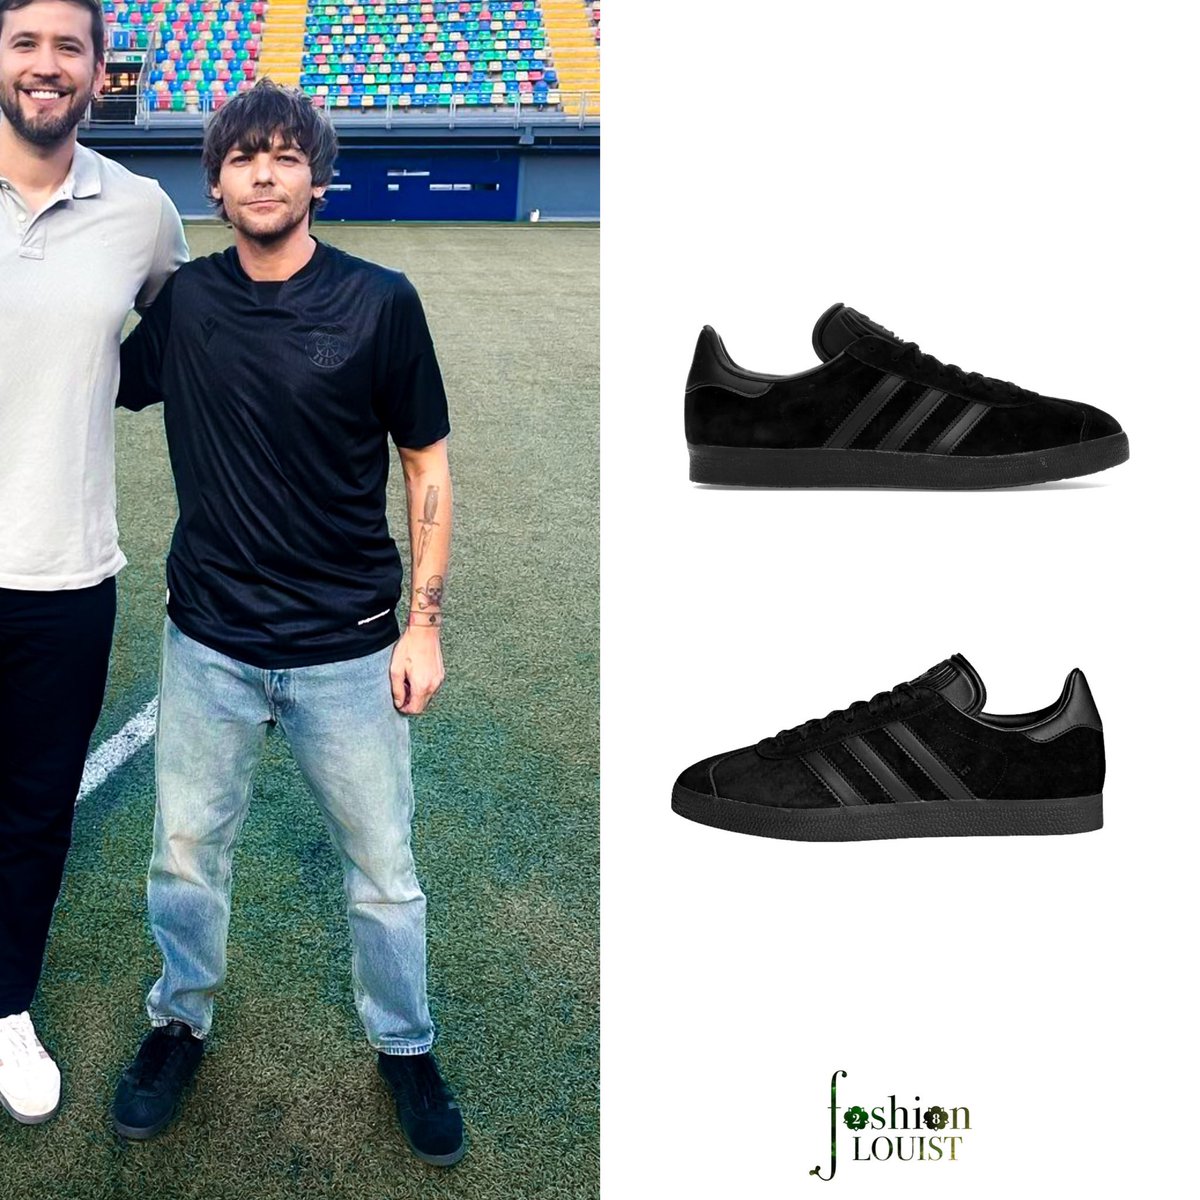 Louis wore Adidas Gazelle Shoes in Core Black in Chile yesterday. These '60s-era soccer sneakers reissue have authentic textures, materials and proportions. The upper is made of nubuck and features tonal trim and silver-colored lettering. — adidas.com/us/gazelle-sho…